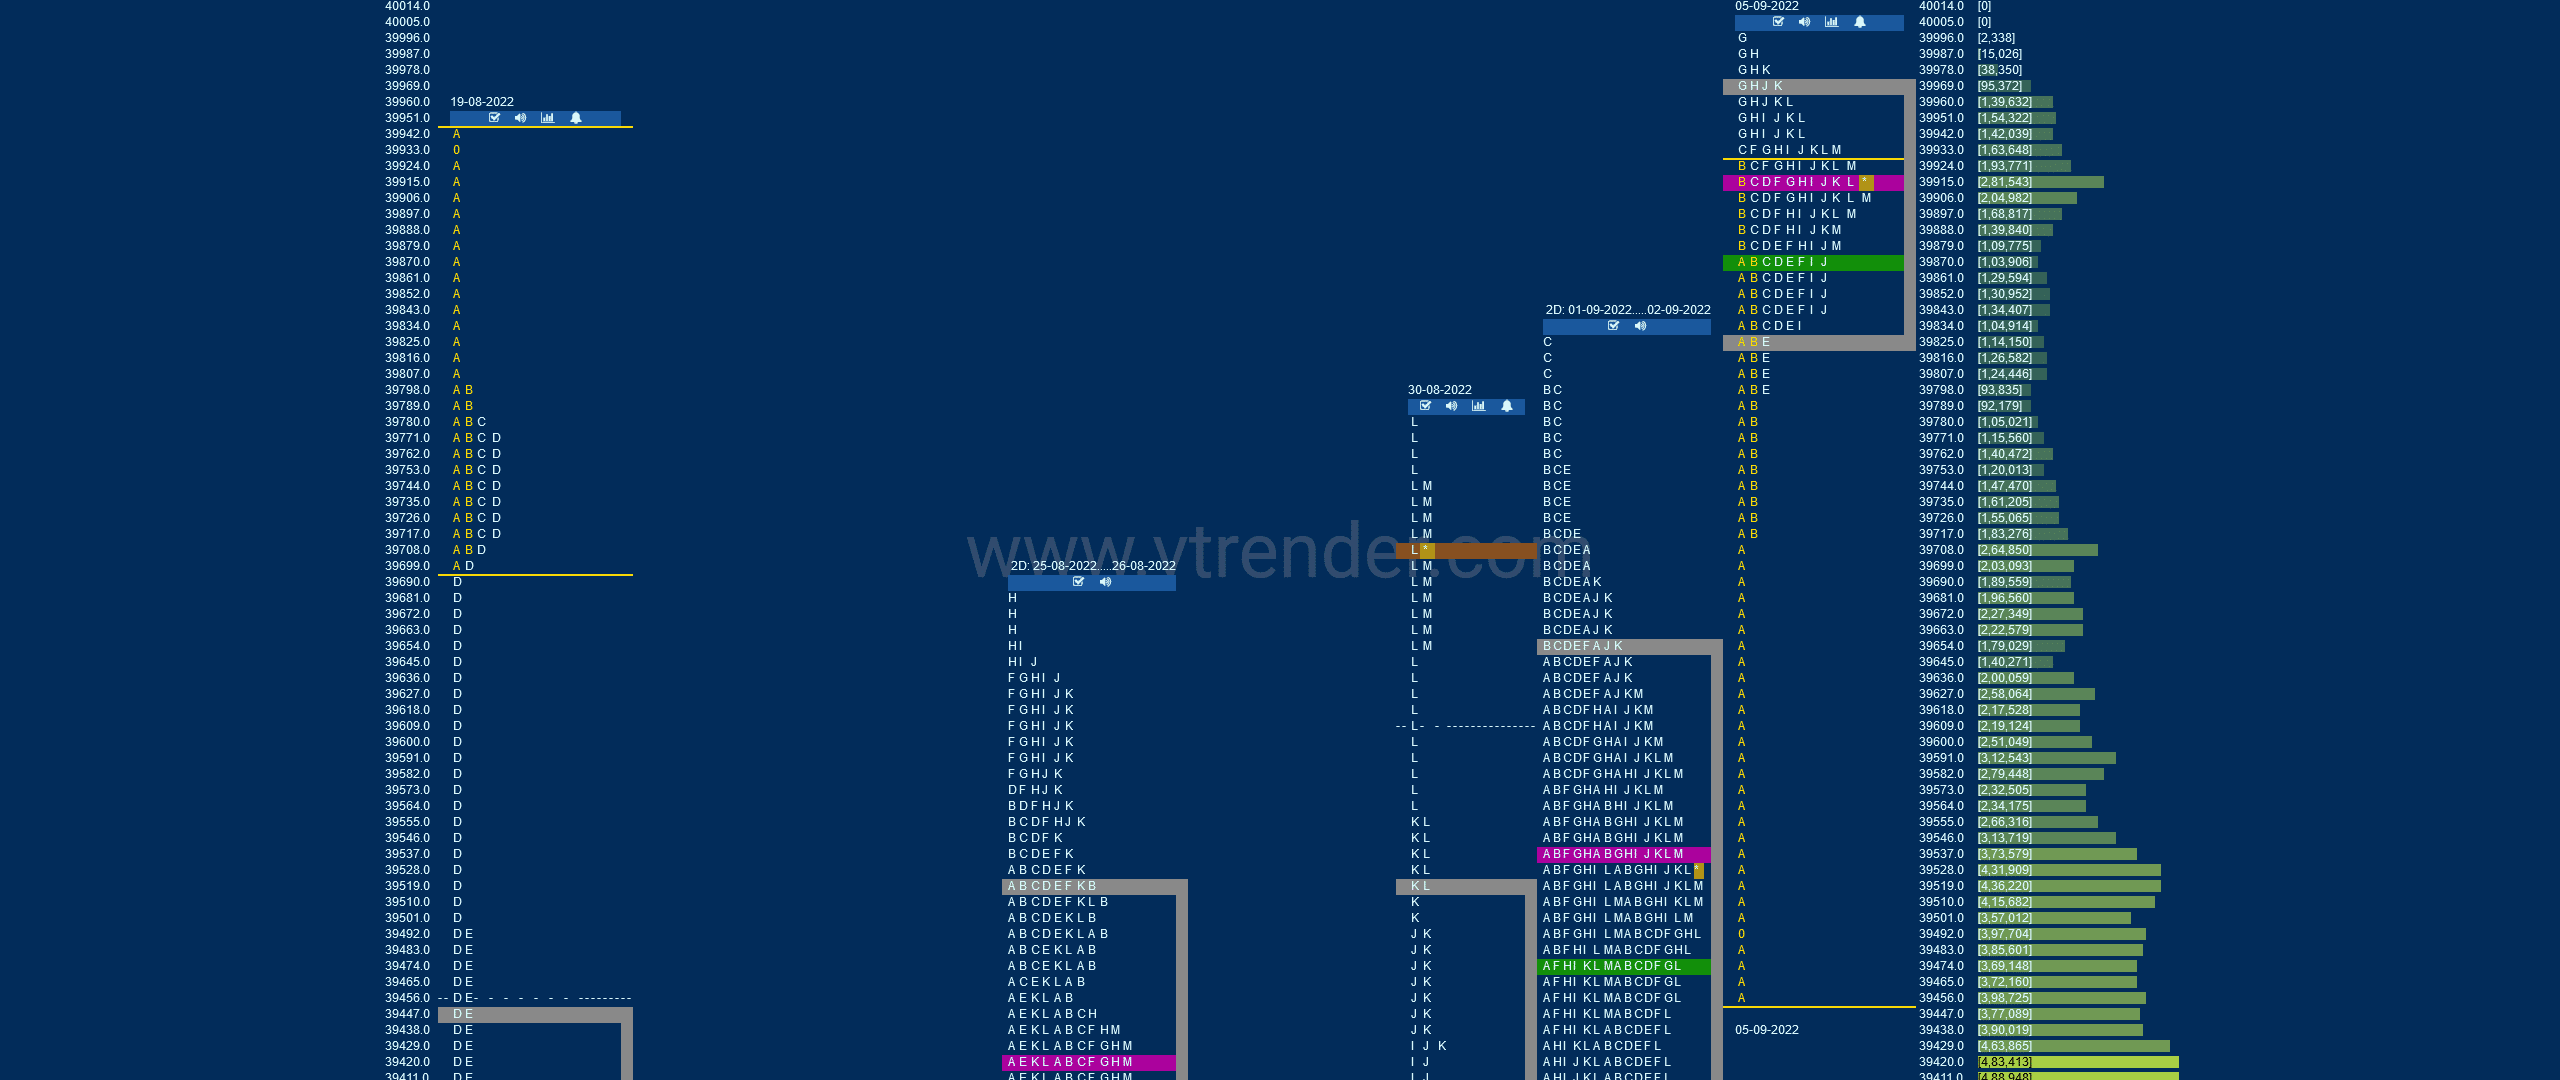 Bnf 2 Market Profile Analysis Dated 05Th Sep 2022